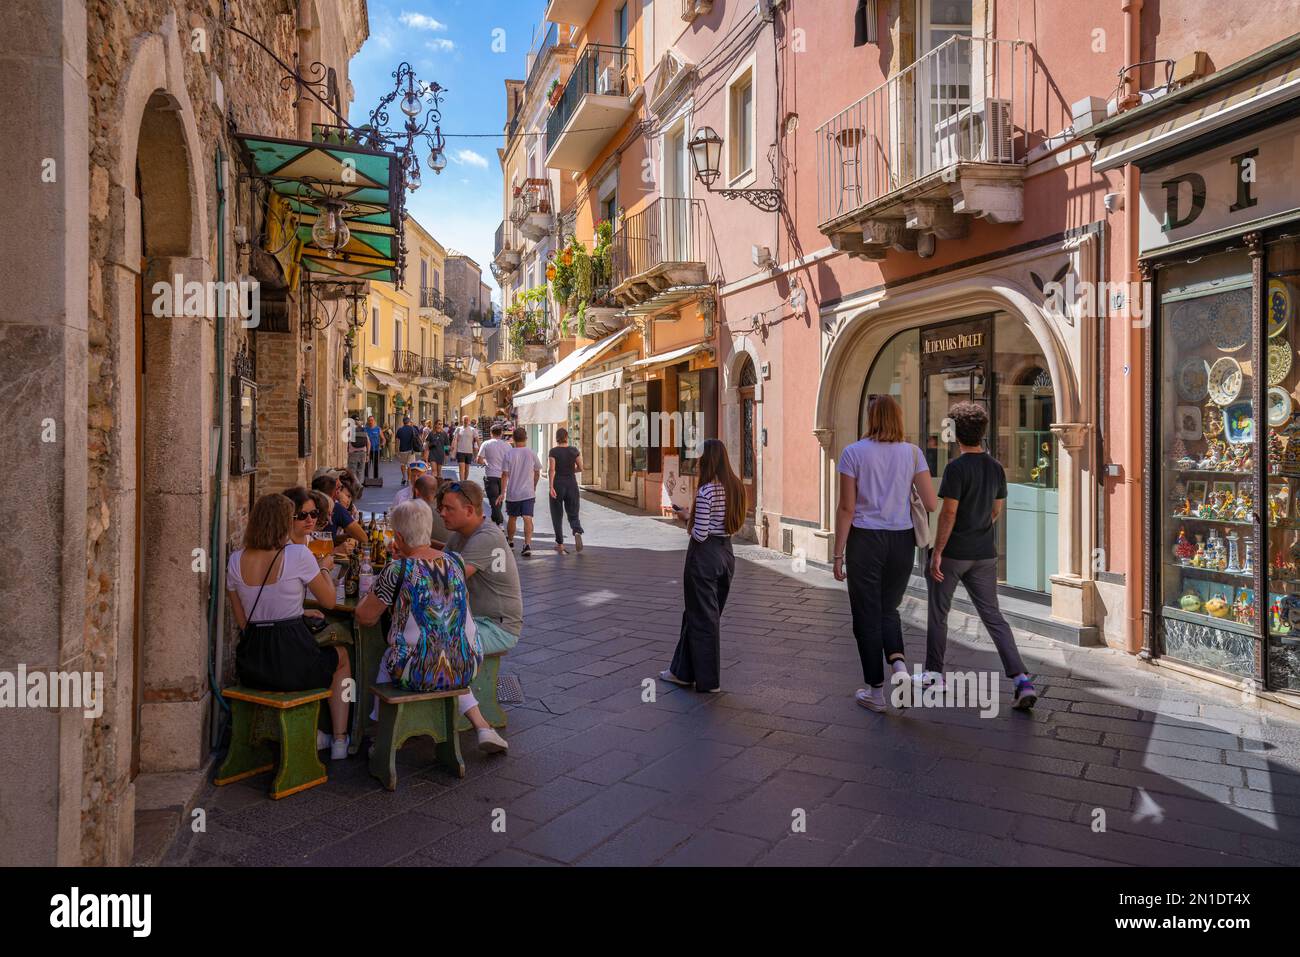 View of cafes and restaurants on busy street in Taormina, Taormina, Sicily, Italy, Mediterranean, Europe Stock Photo